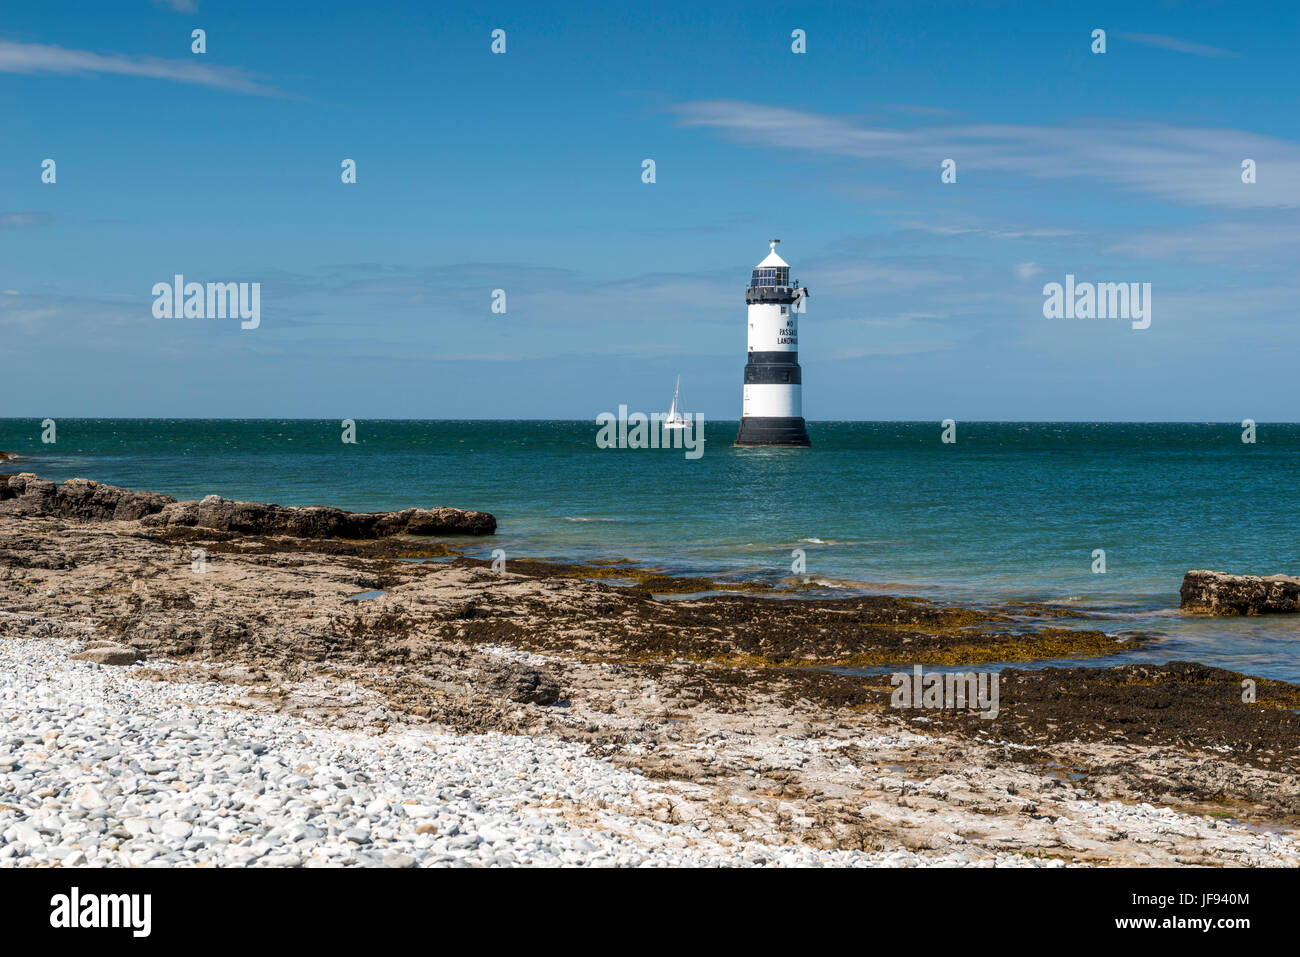 Beautiful seascape depicting Penmon Lighthouse and surrounding coastal features, (Trwyn Du, Perch Rock, Ynys Seiriol, Puffin Island) on a summers day. Stock Photo